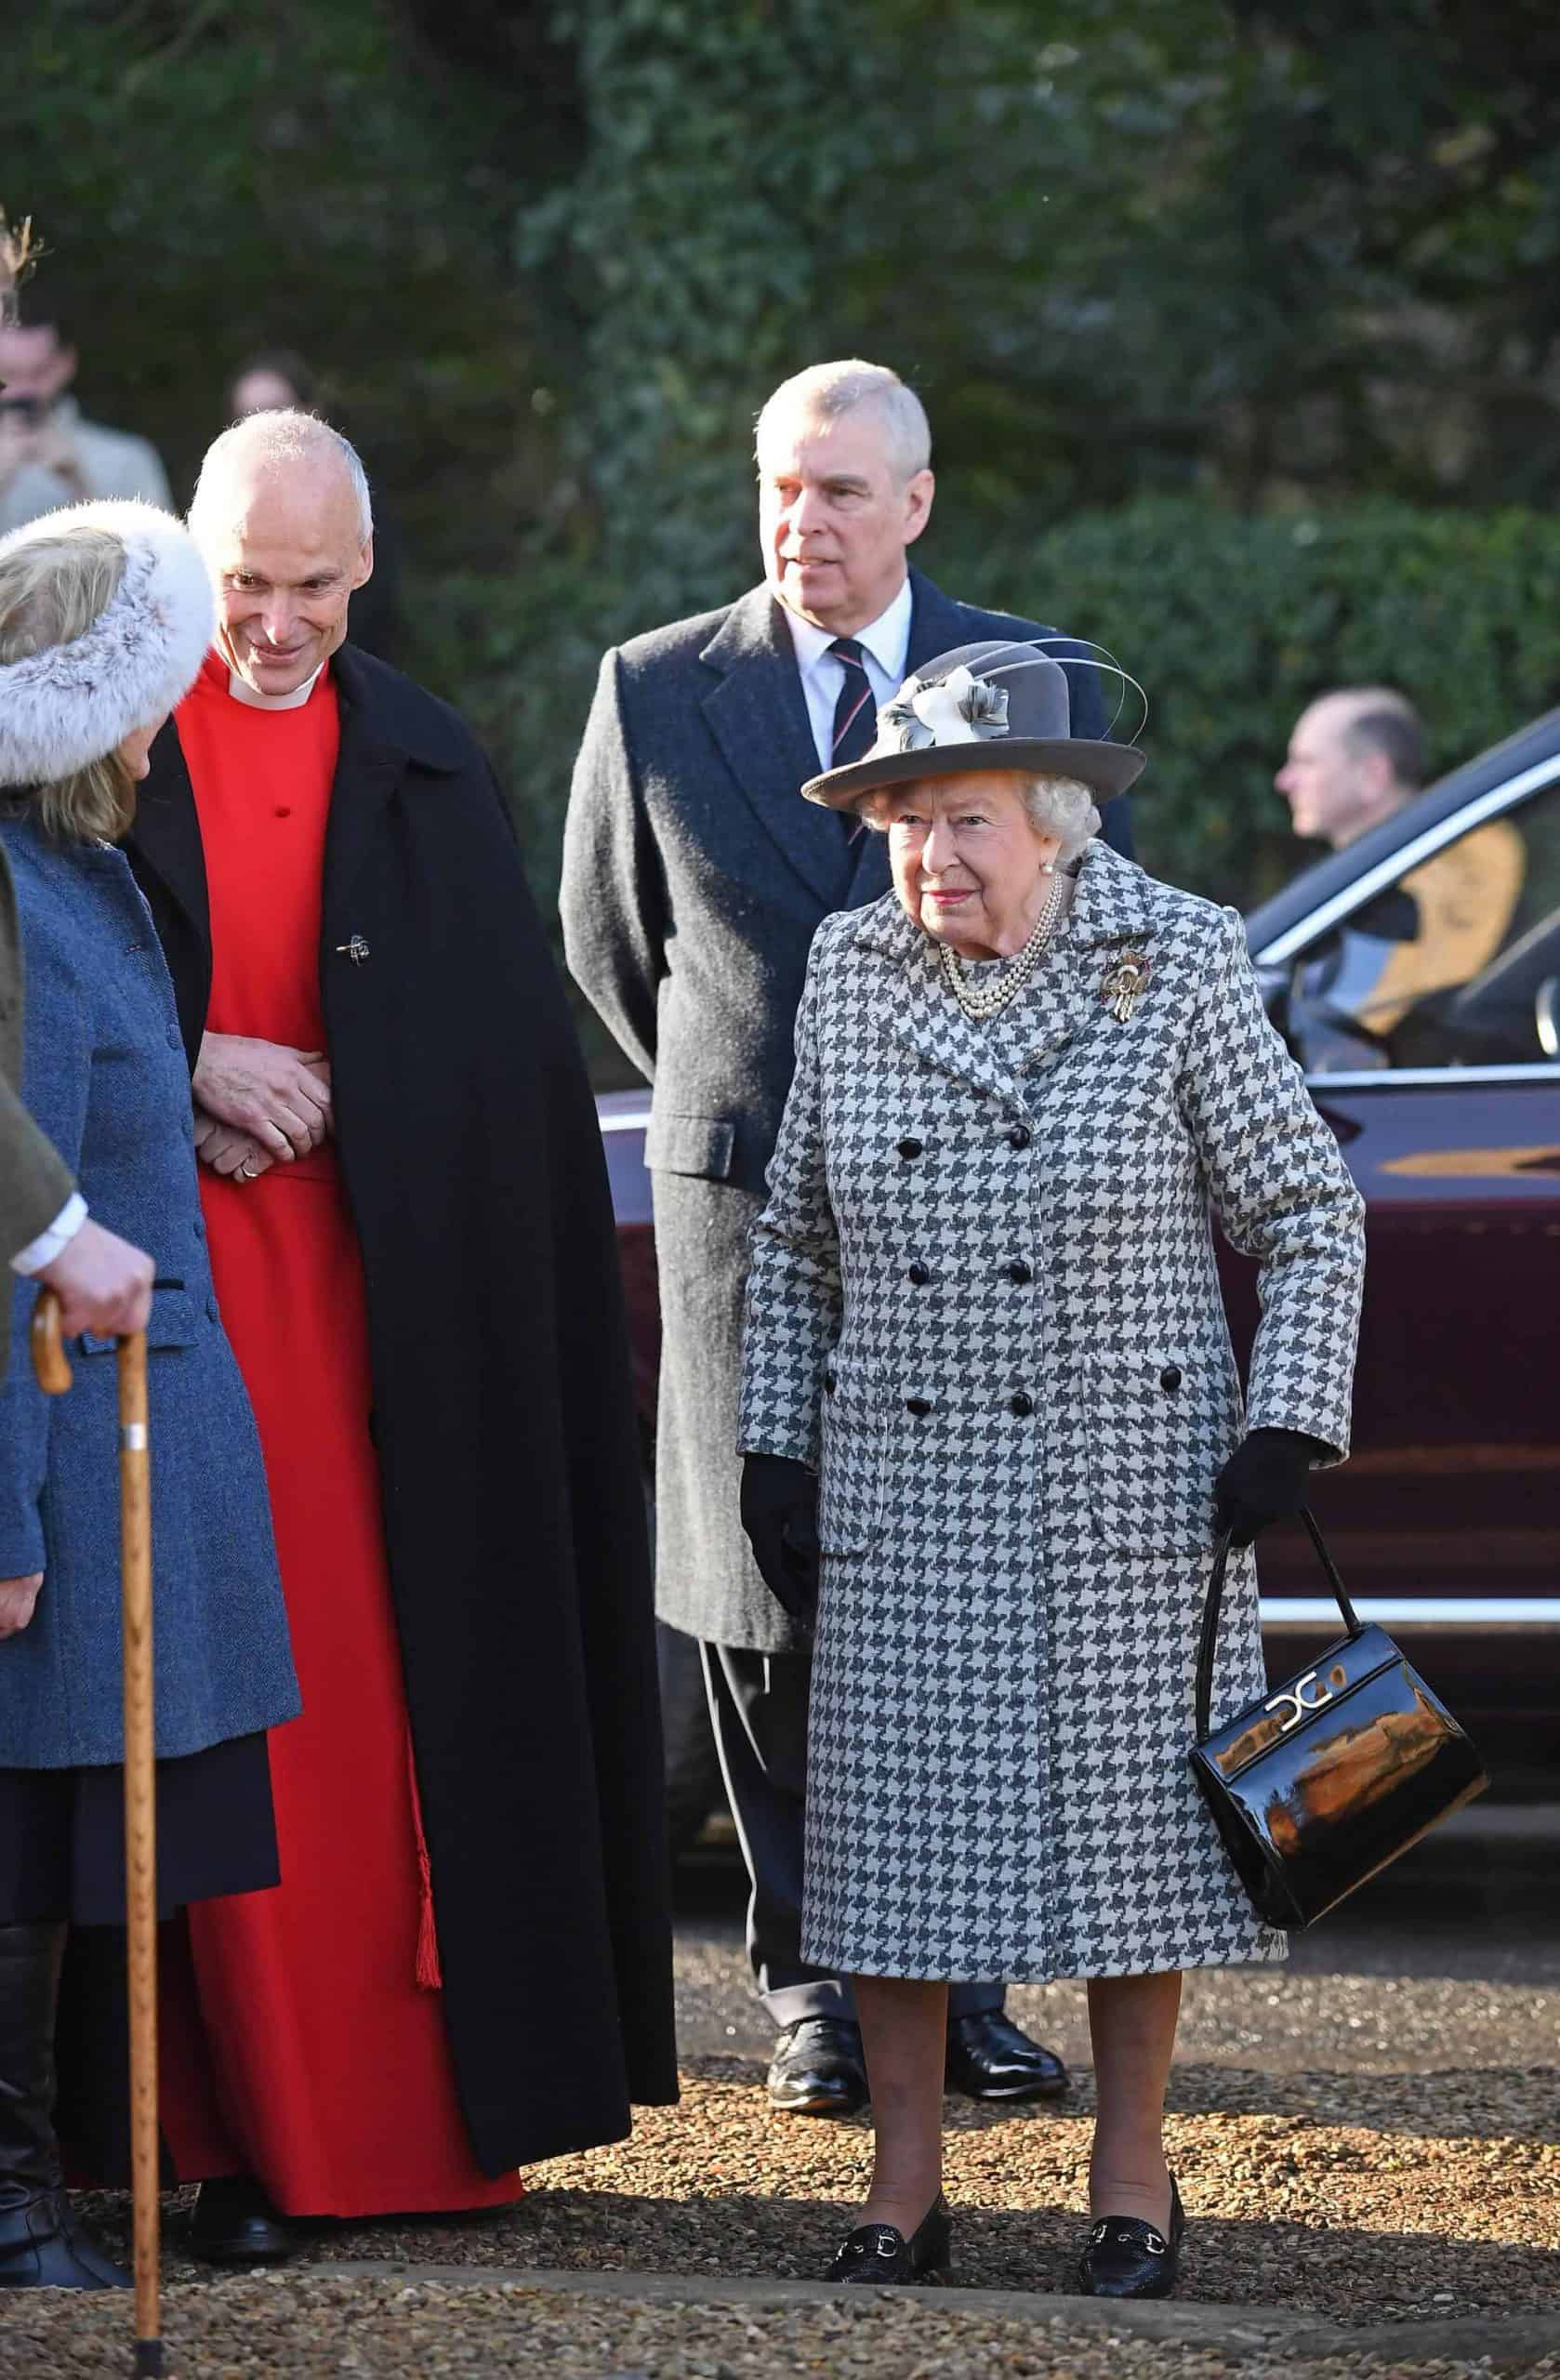 Queen joined by Andrew at church as Harry and Meghan step back from royal life